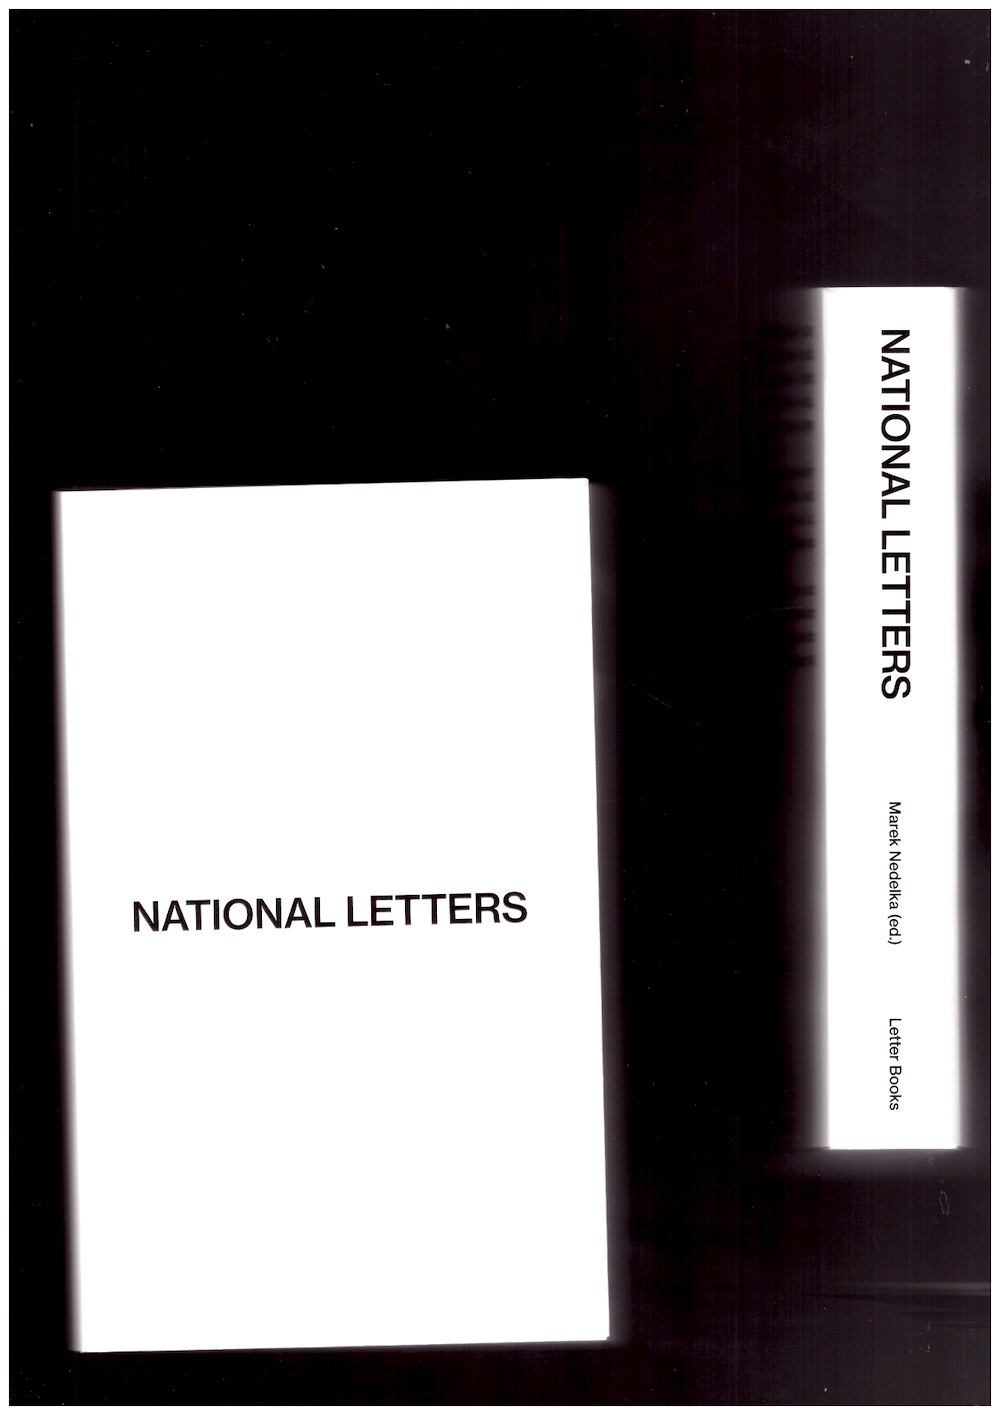 NEDELKA, Marek (ed.) - National Letters: Languages and Scripts as Nation-building Tools